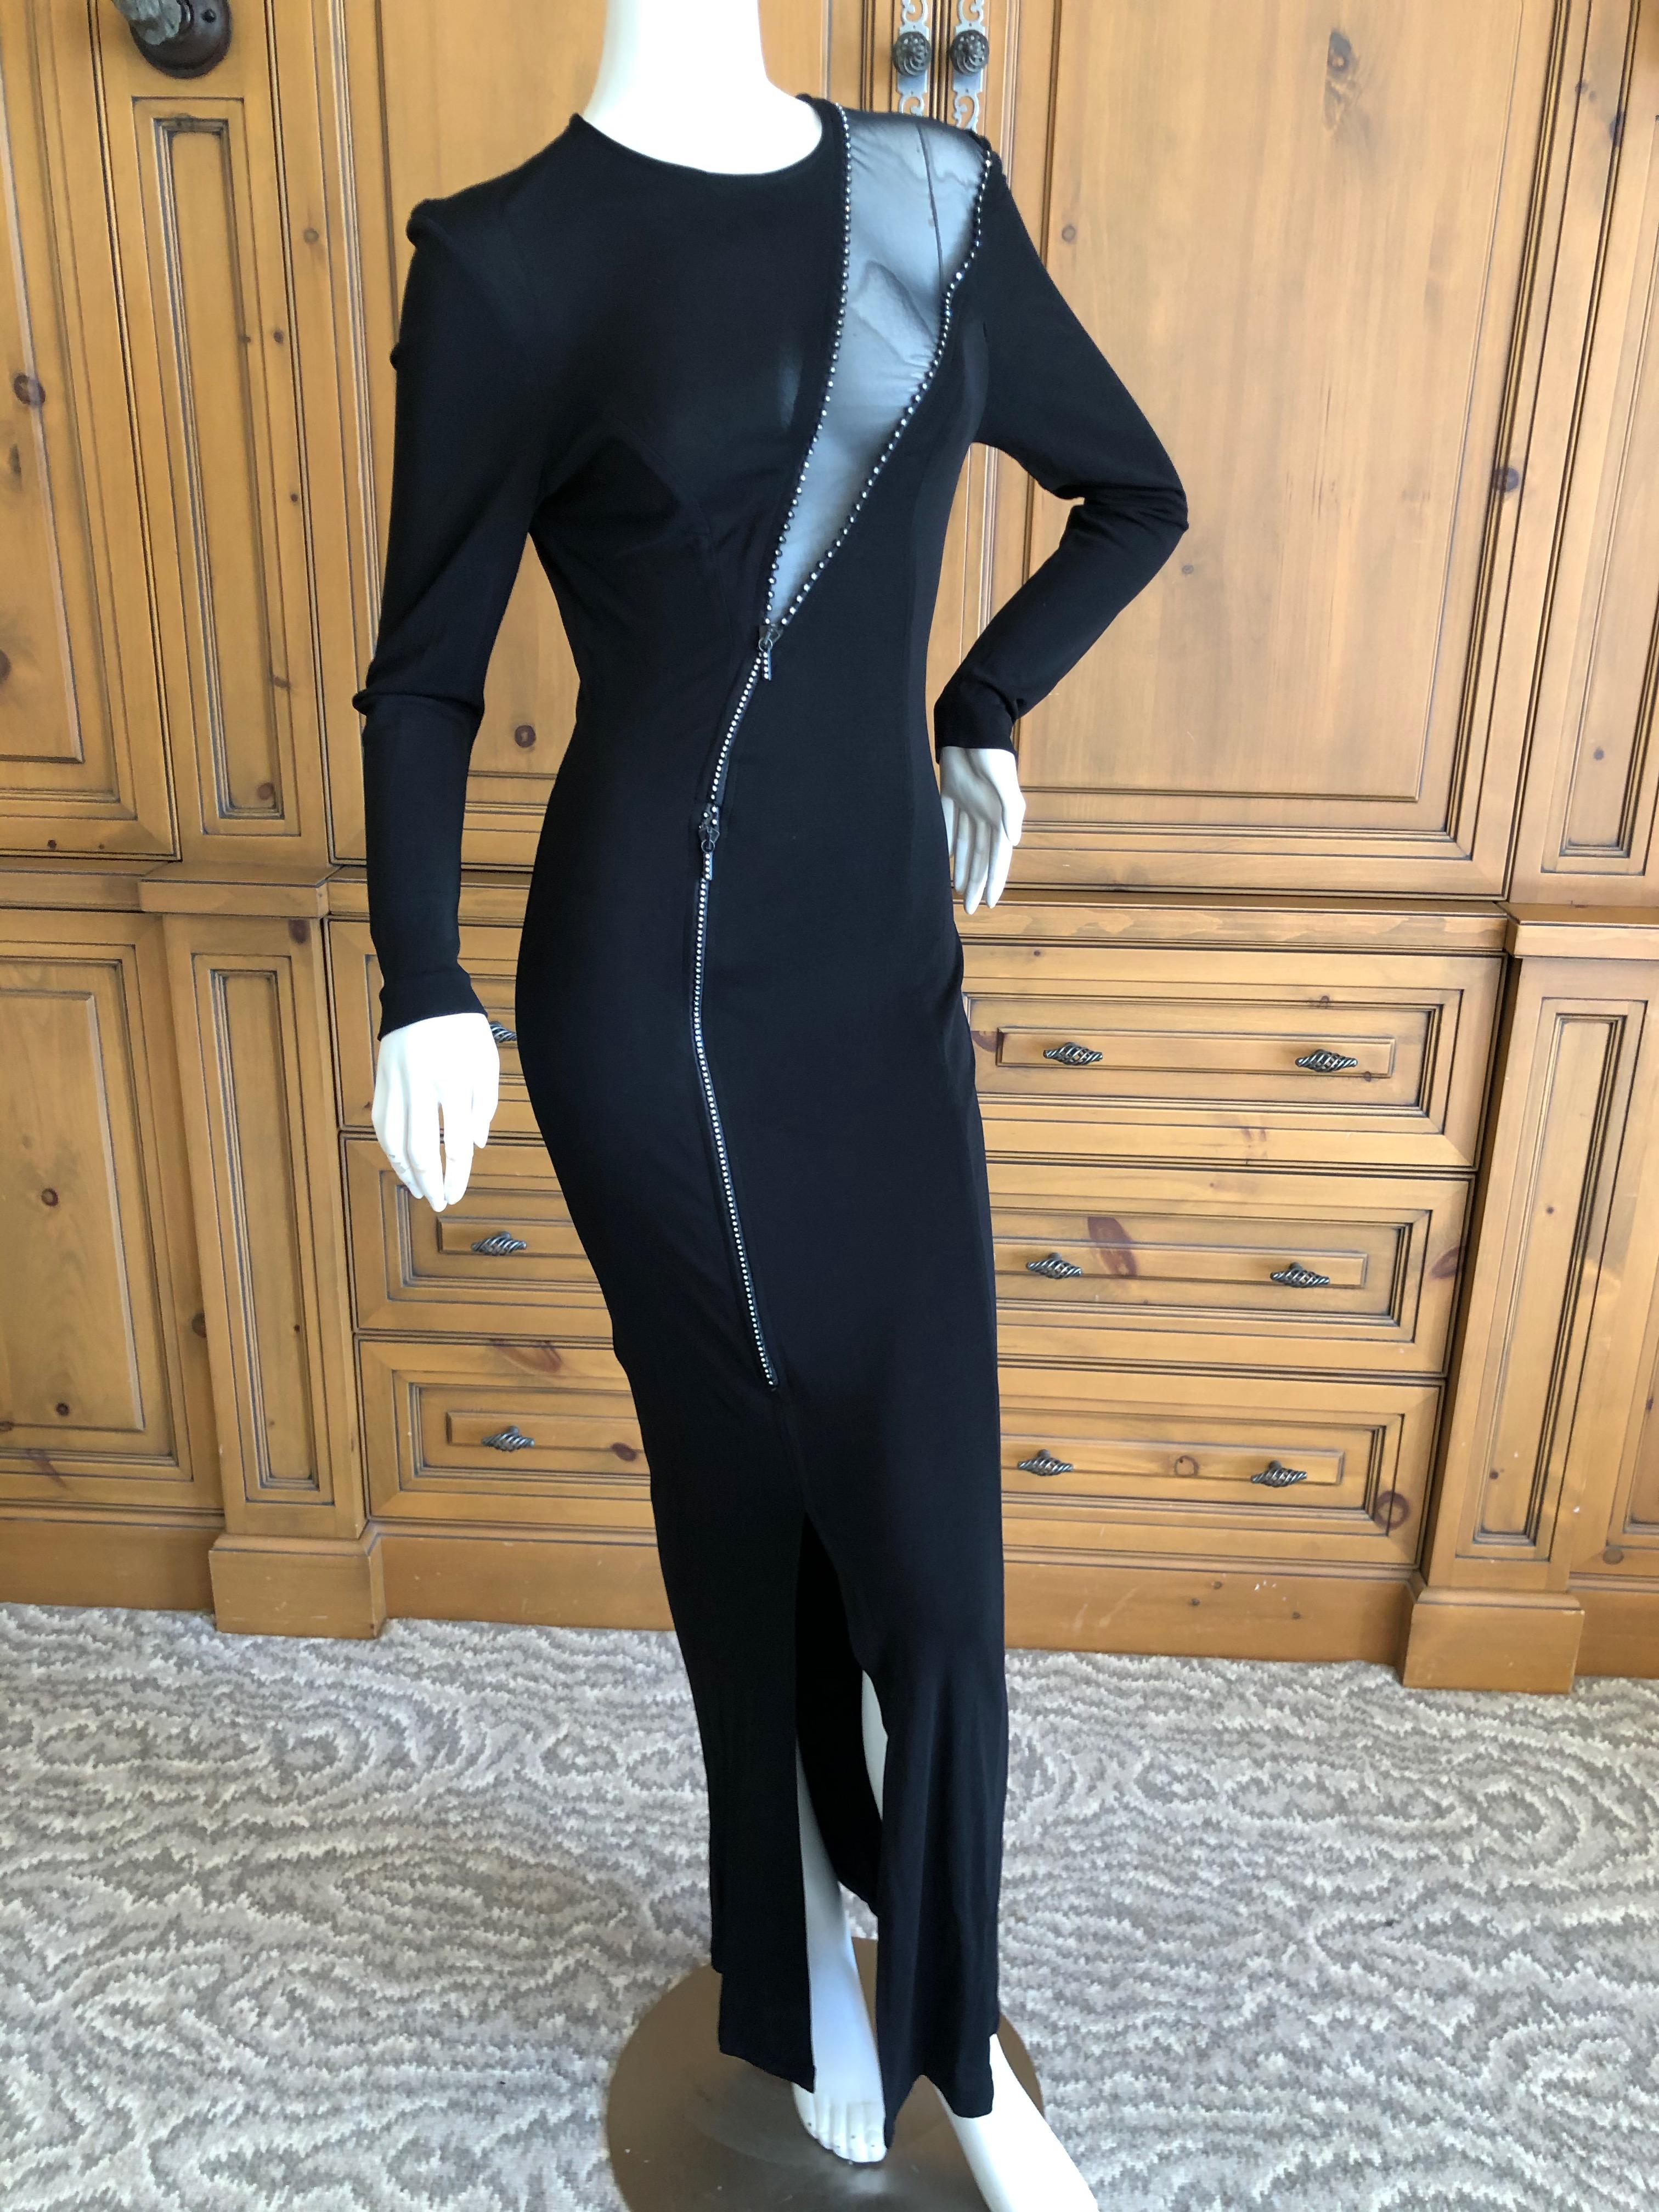 Thierry Mugler Vintage 1980's Black Evening Dress w Sheer Crystal Zipper Details.
This is so much prettier than the photos show.
Size 40, there is a lot of stretch
 Bust 35